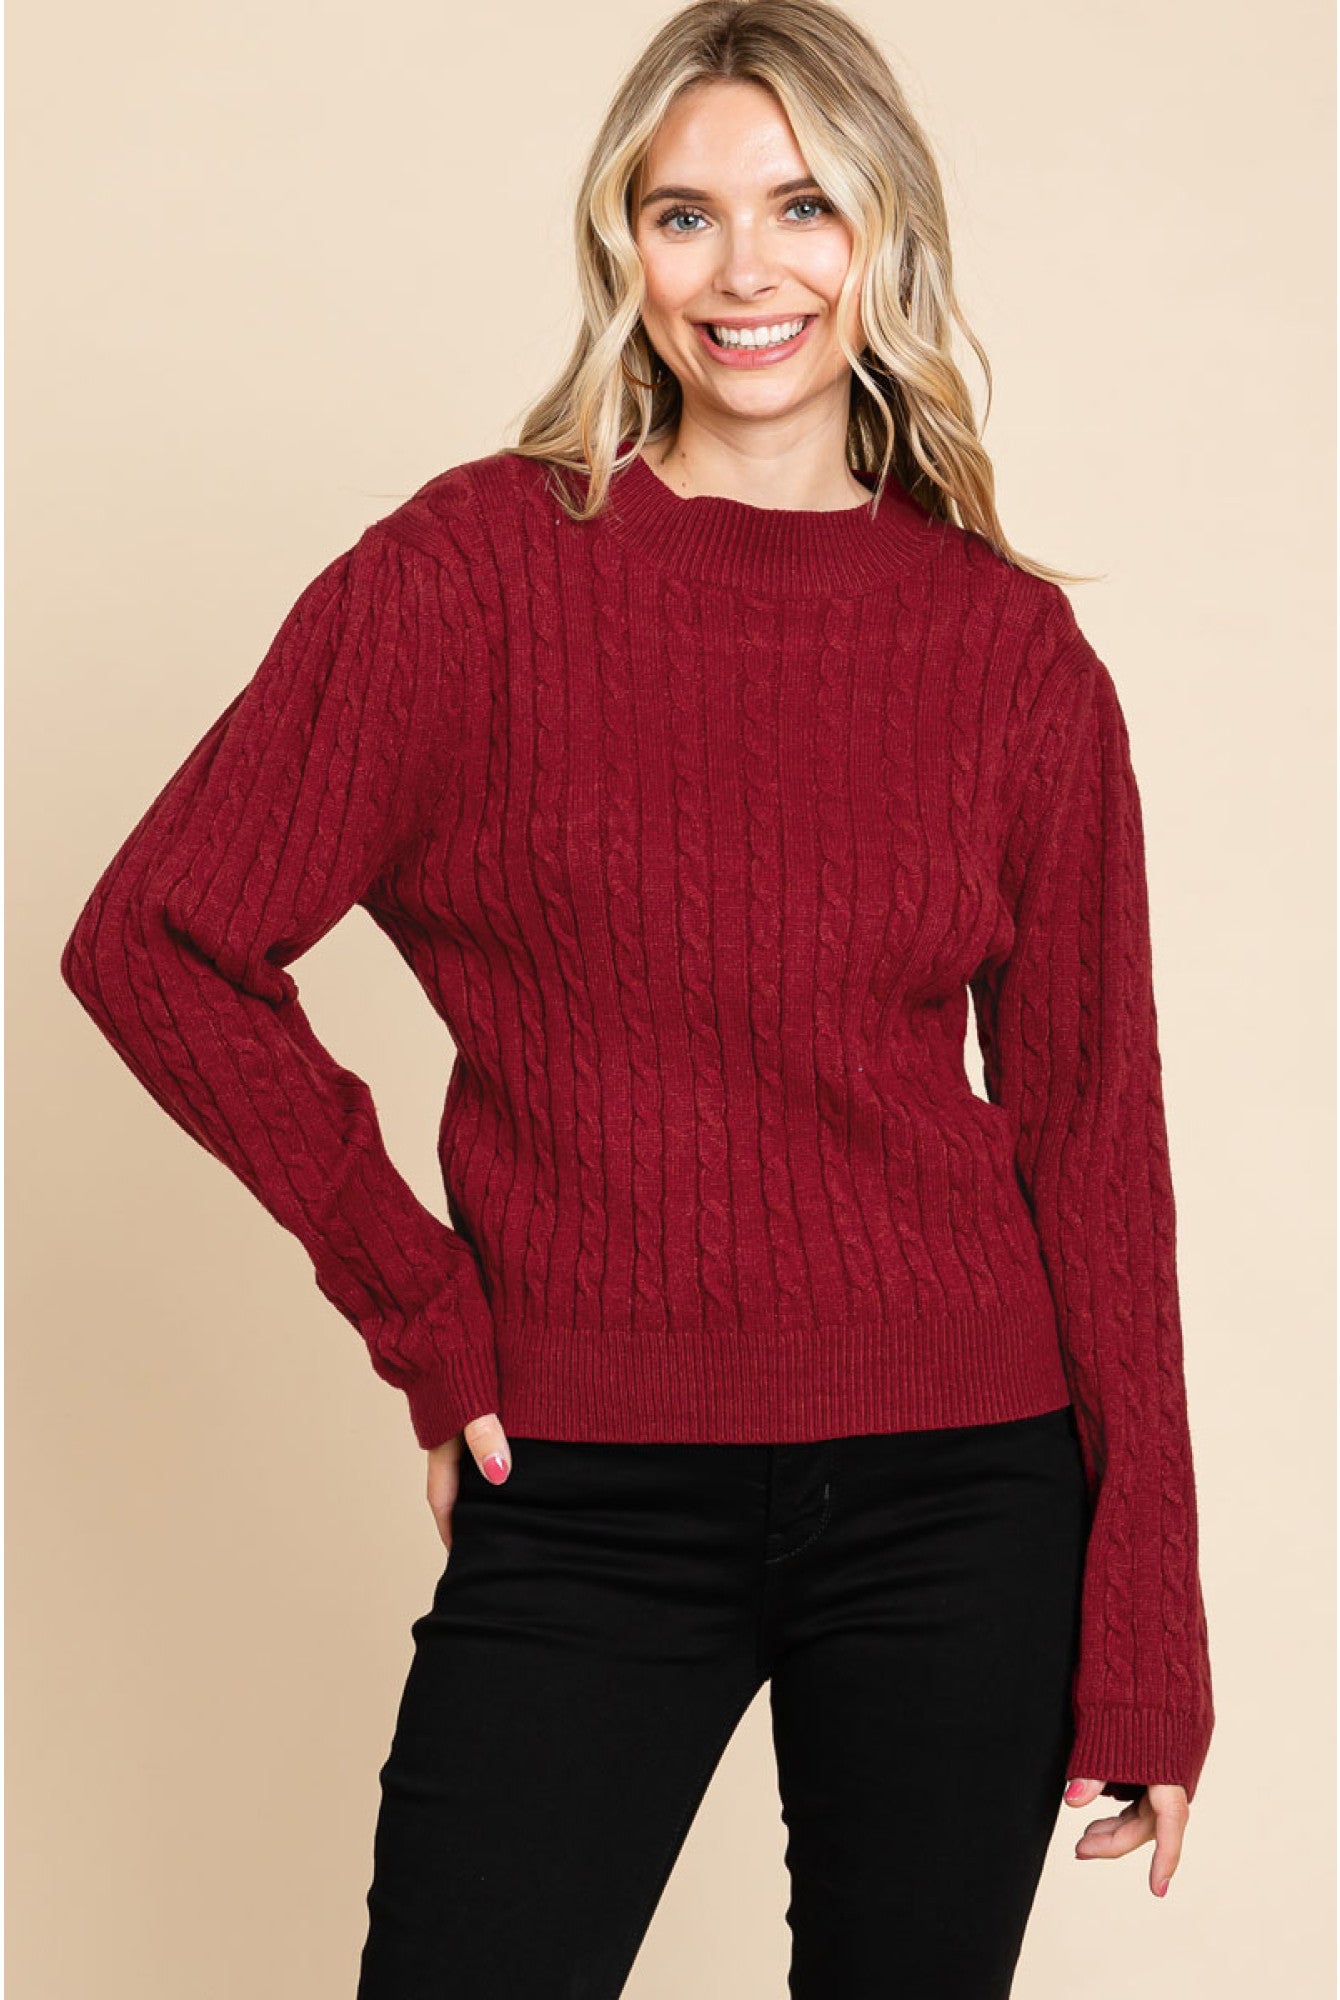 Solid cable knit sweater-Sweaters-Podos Boutique, a Women's Fashion Boutique Located in Calera, AL